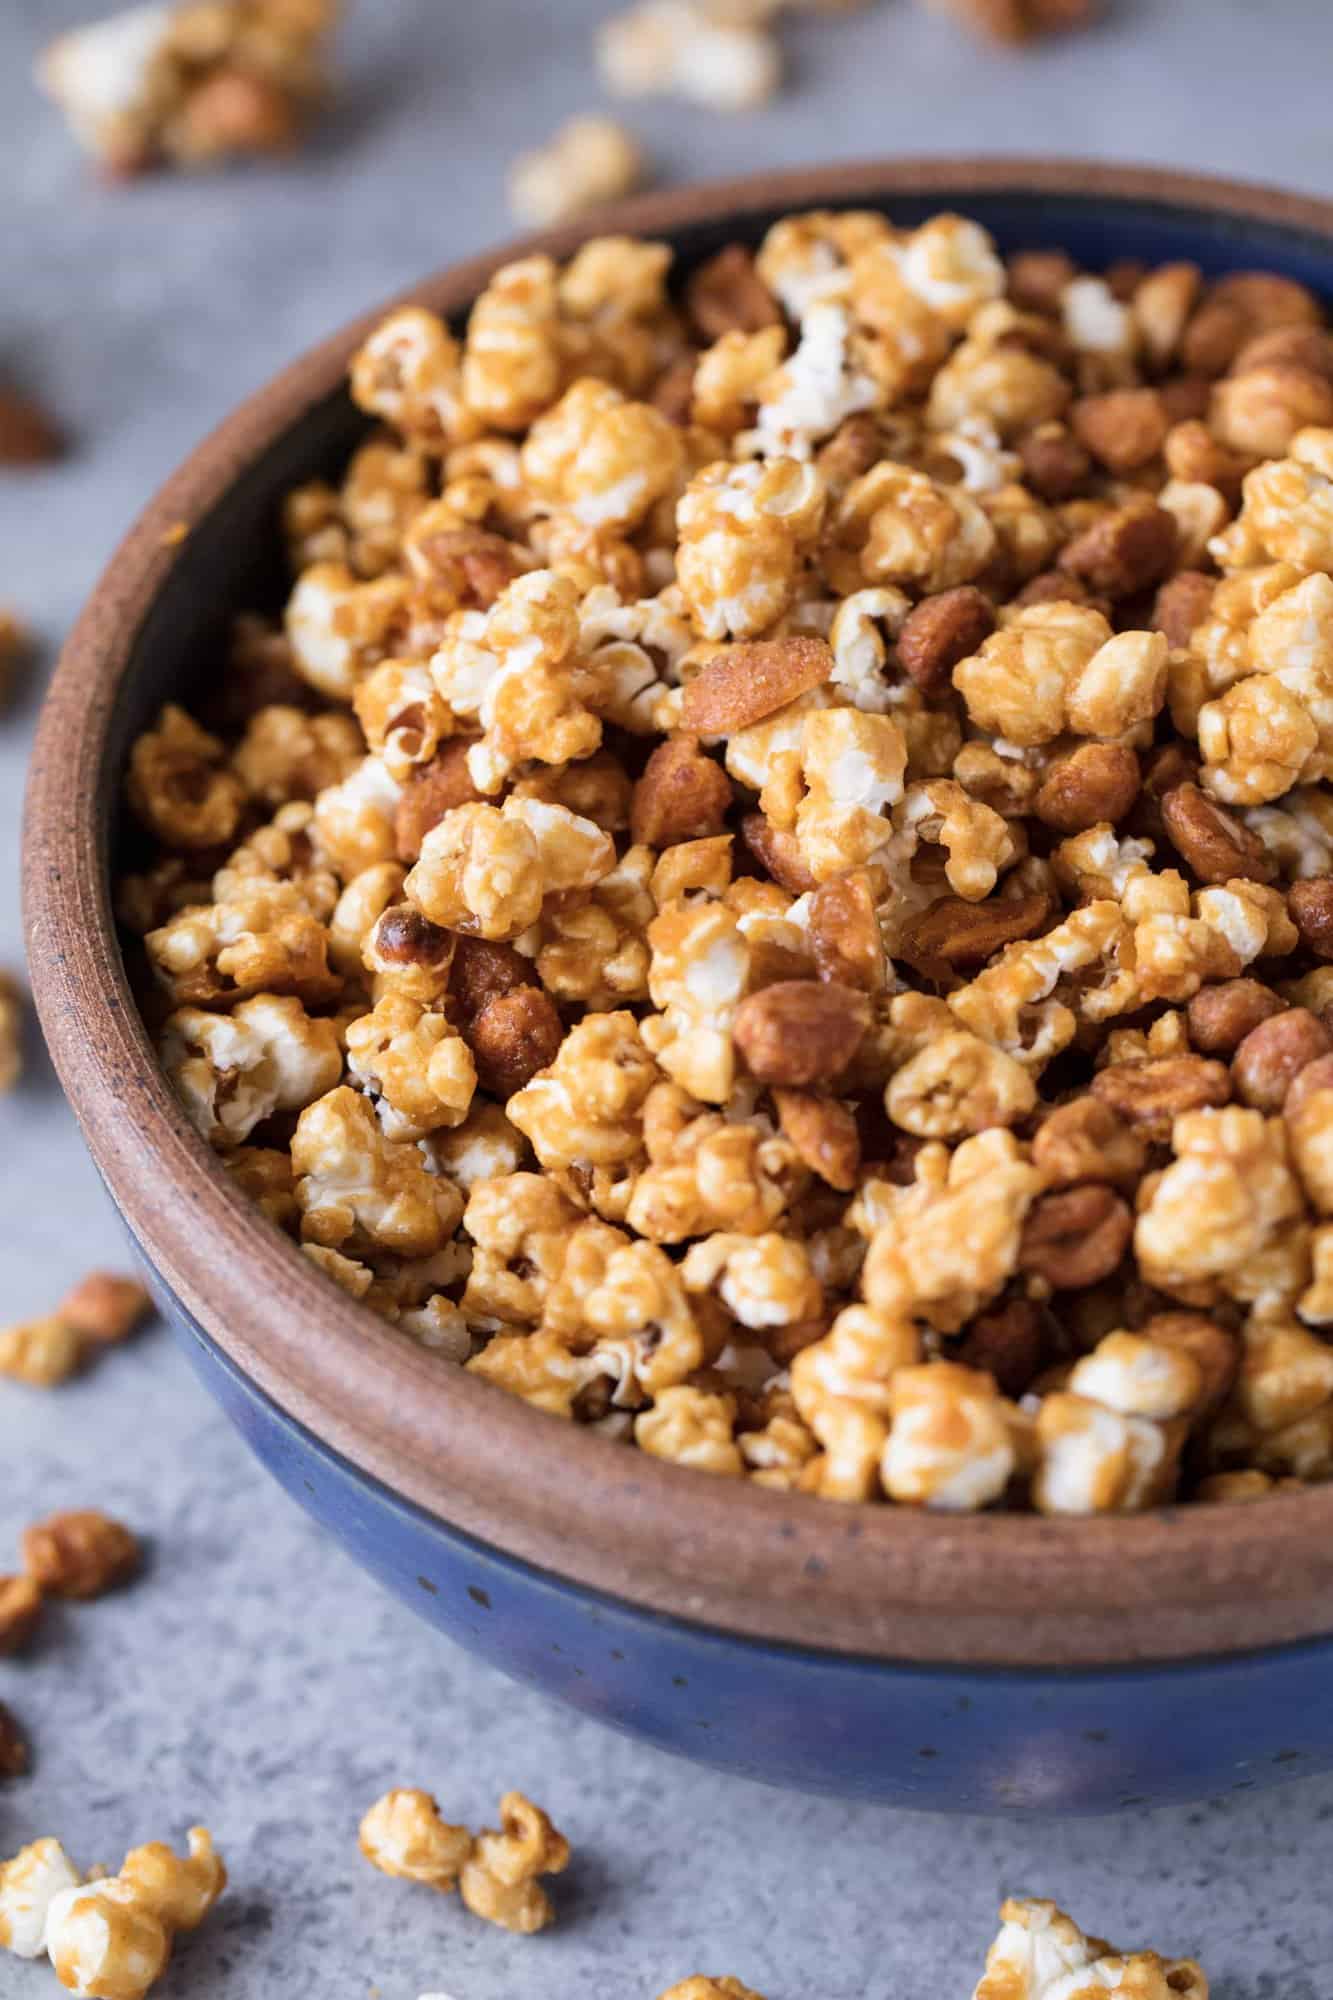 Amish Honey Roasted Caramel Corn is an updated honey twist on the simple old fashioned treat. Everyone loves caramel corn and this recipe starts with the kernels and ends with honey roasted caramel goodness.